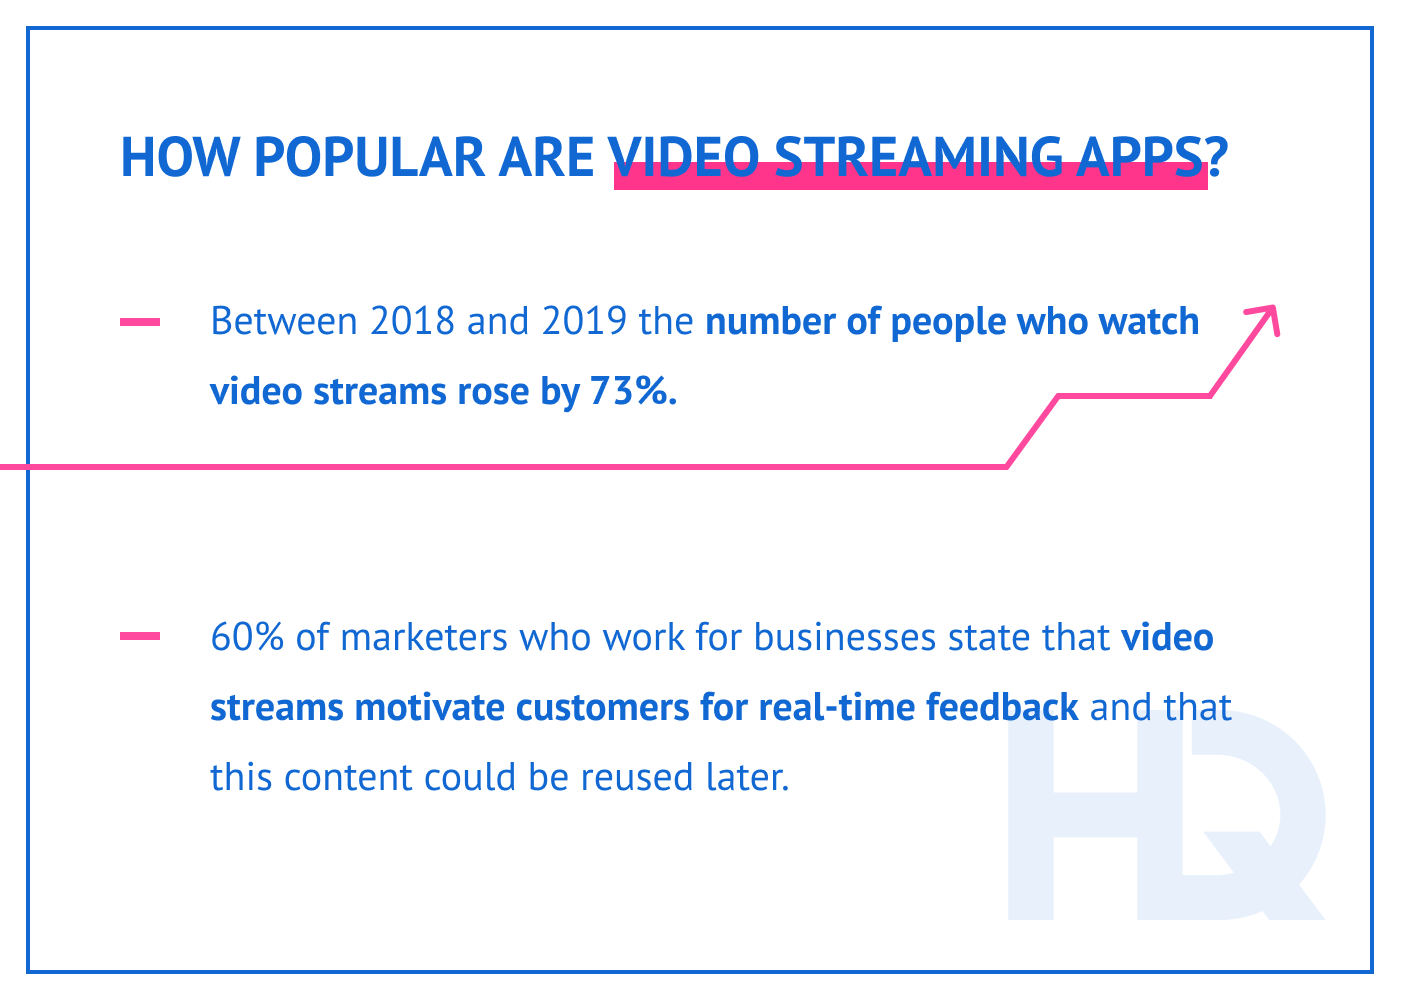 How popular are video streaming apps?